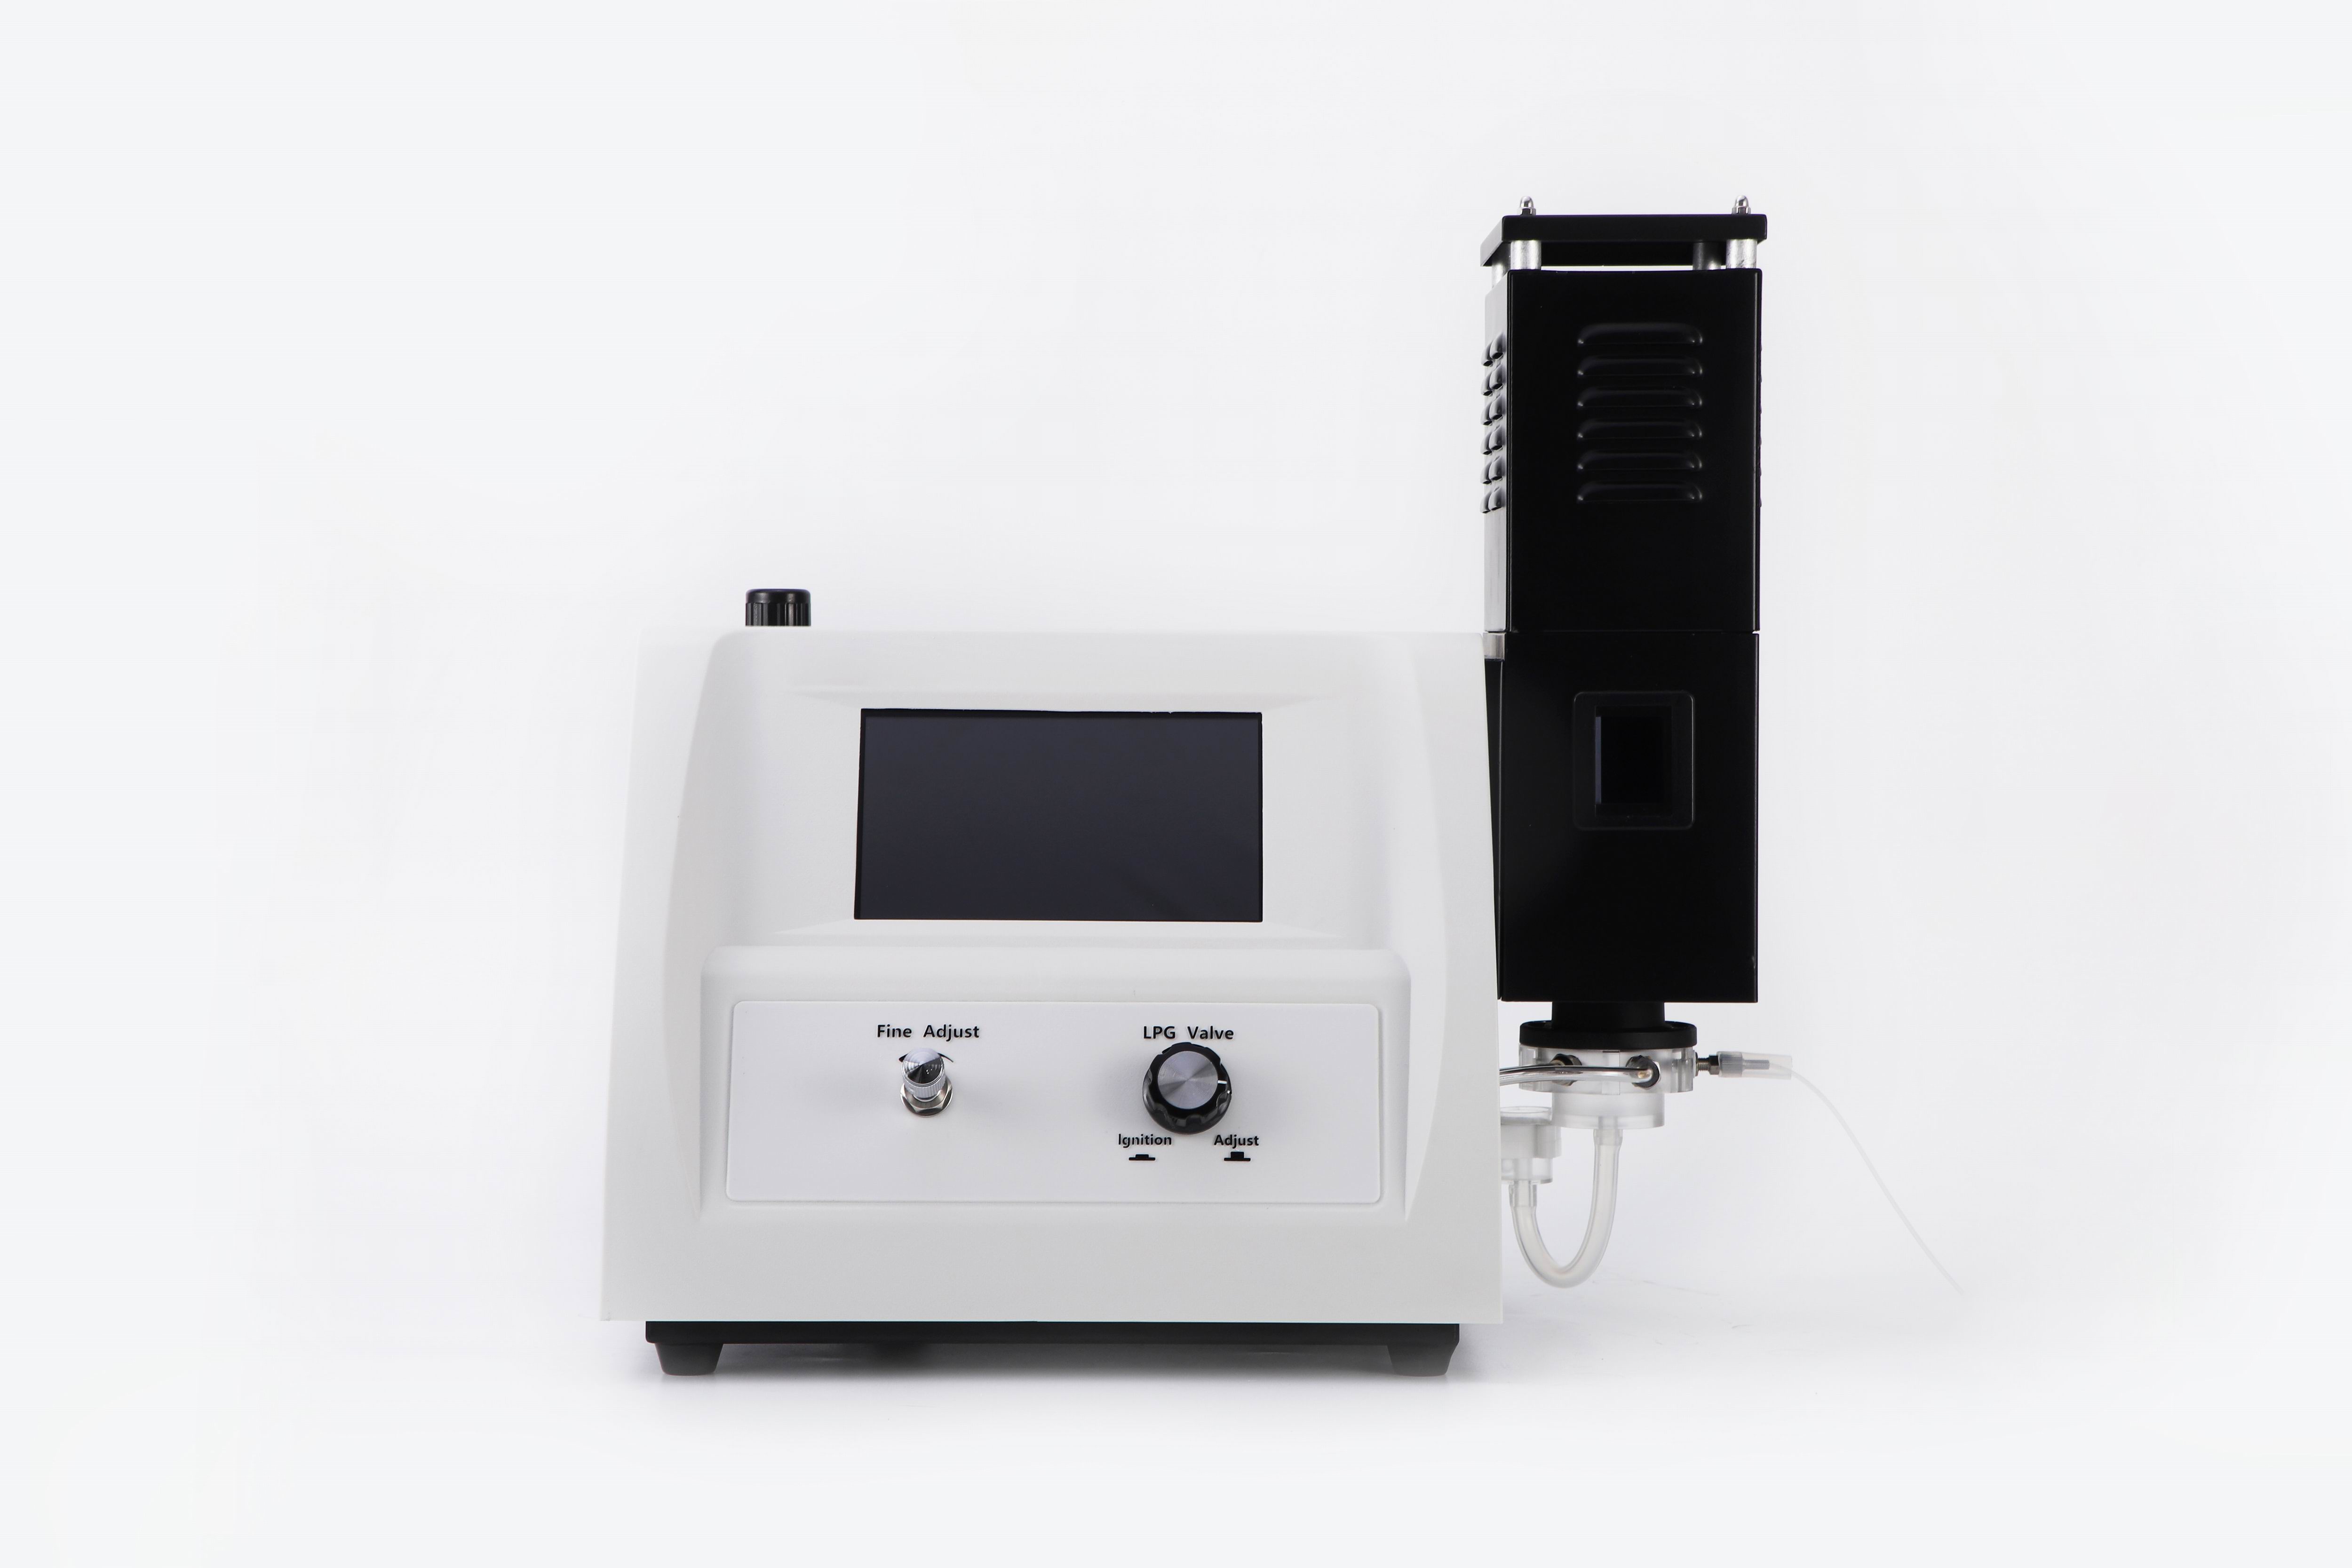  MS-5500 Flame Photometer